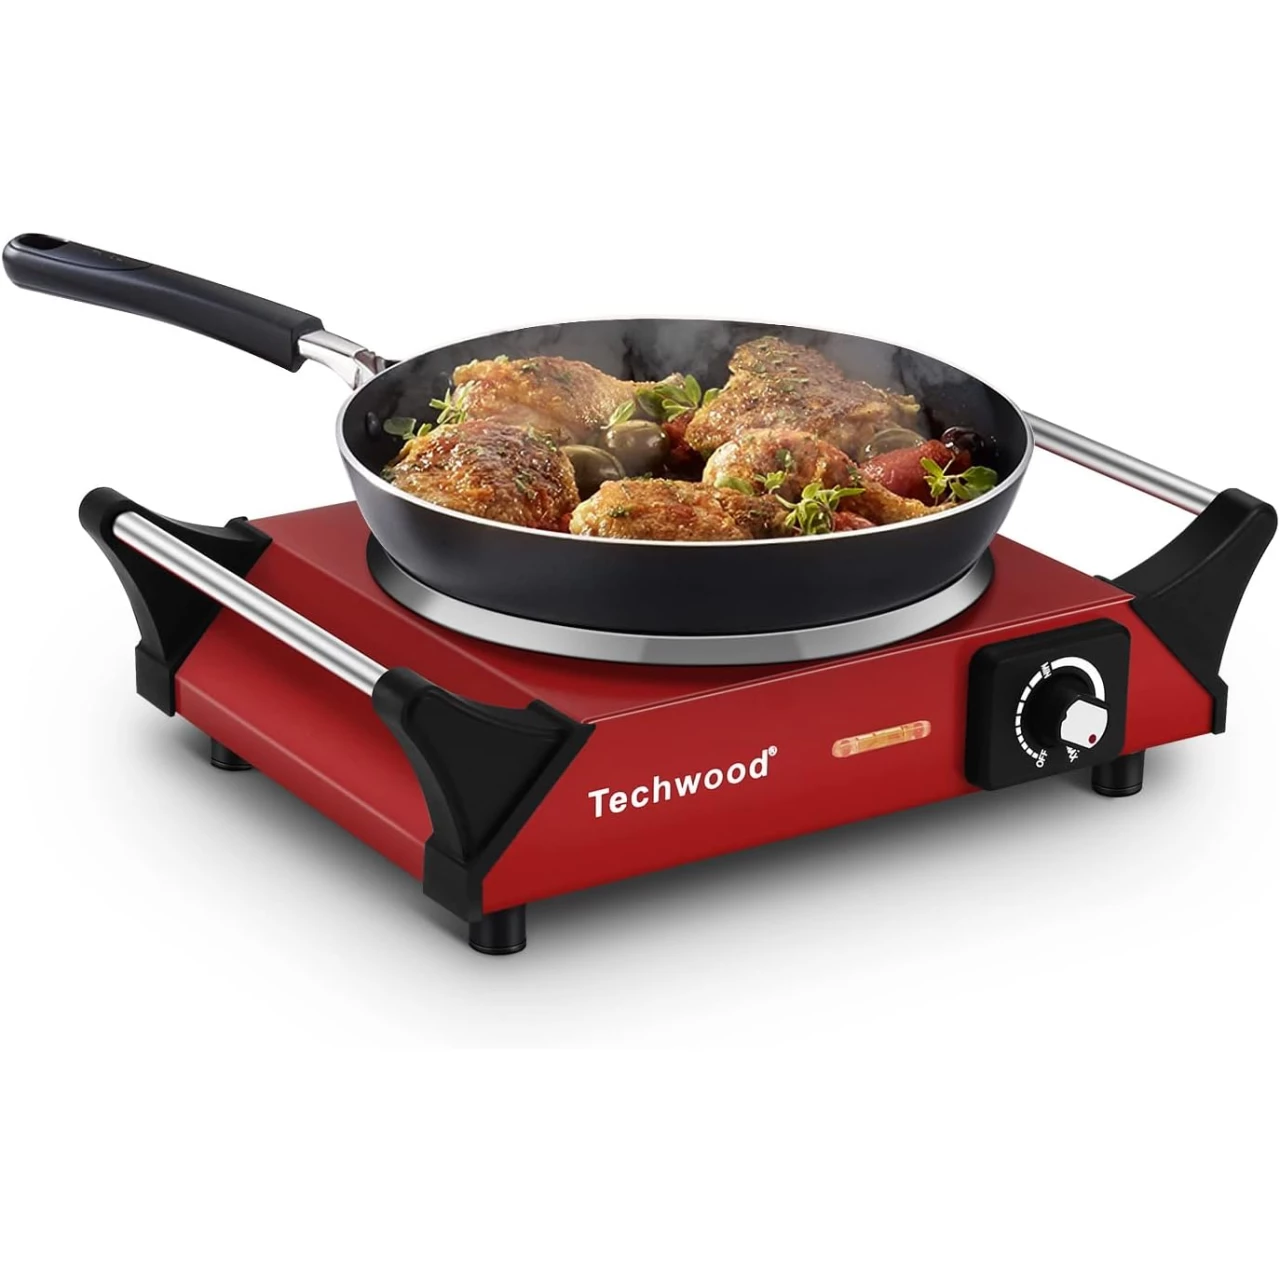 Hot Plate, Techwood Electric Stove for Cooking, 1500W Countertop Single Burner with Adjustable Temperature &amp; Stay Cool Handles, 7.5” Cooktop for Home/RV/Camp, Compatible for All Cookwares, Red